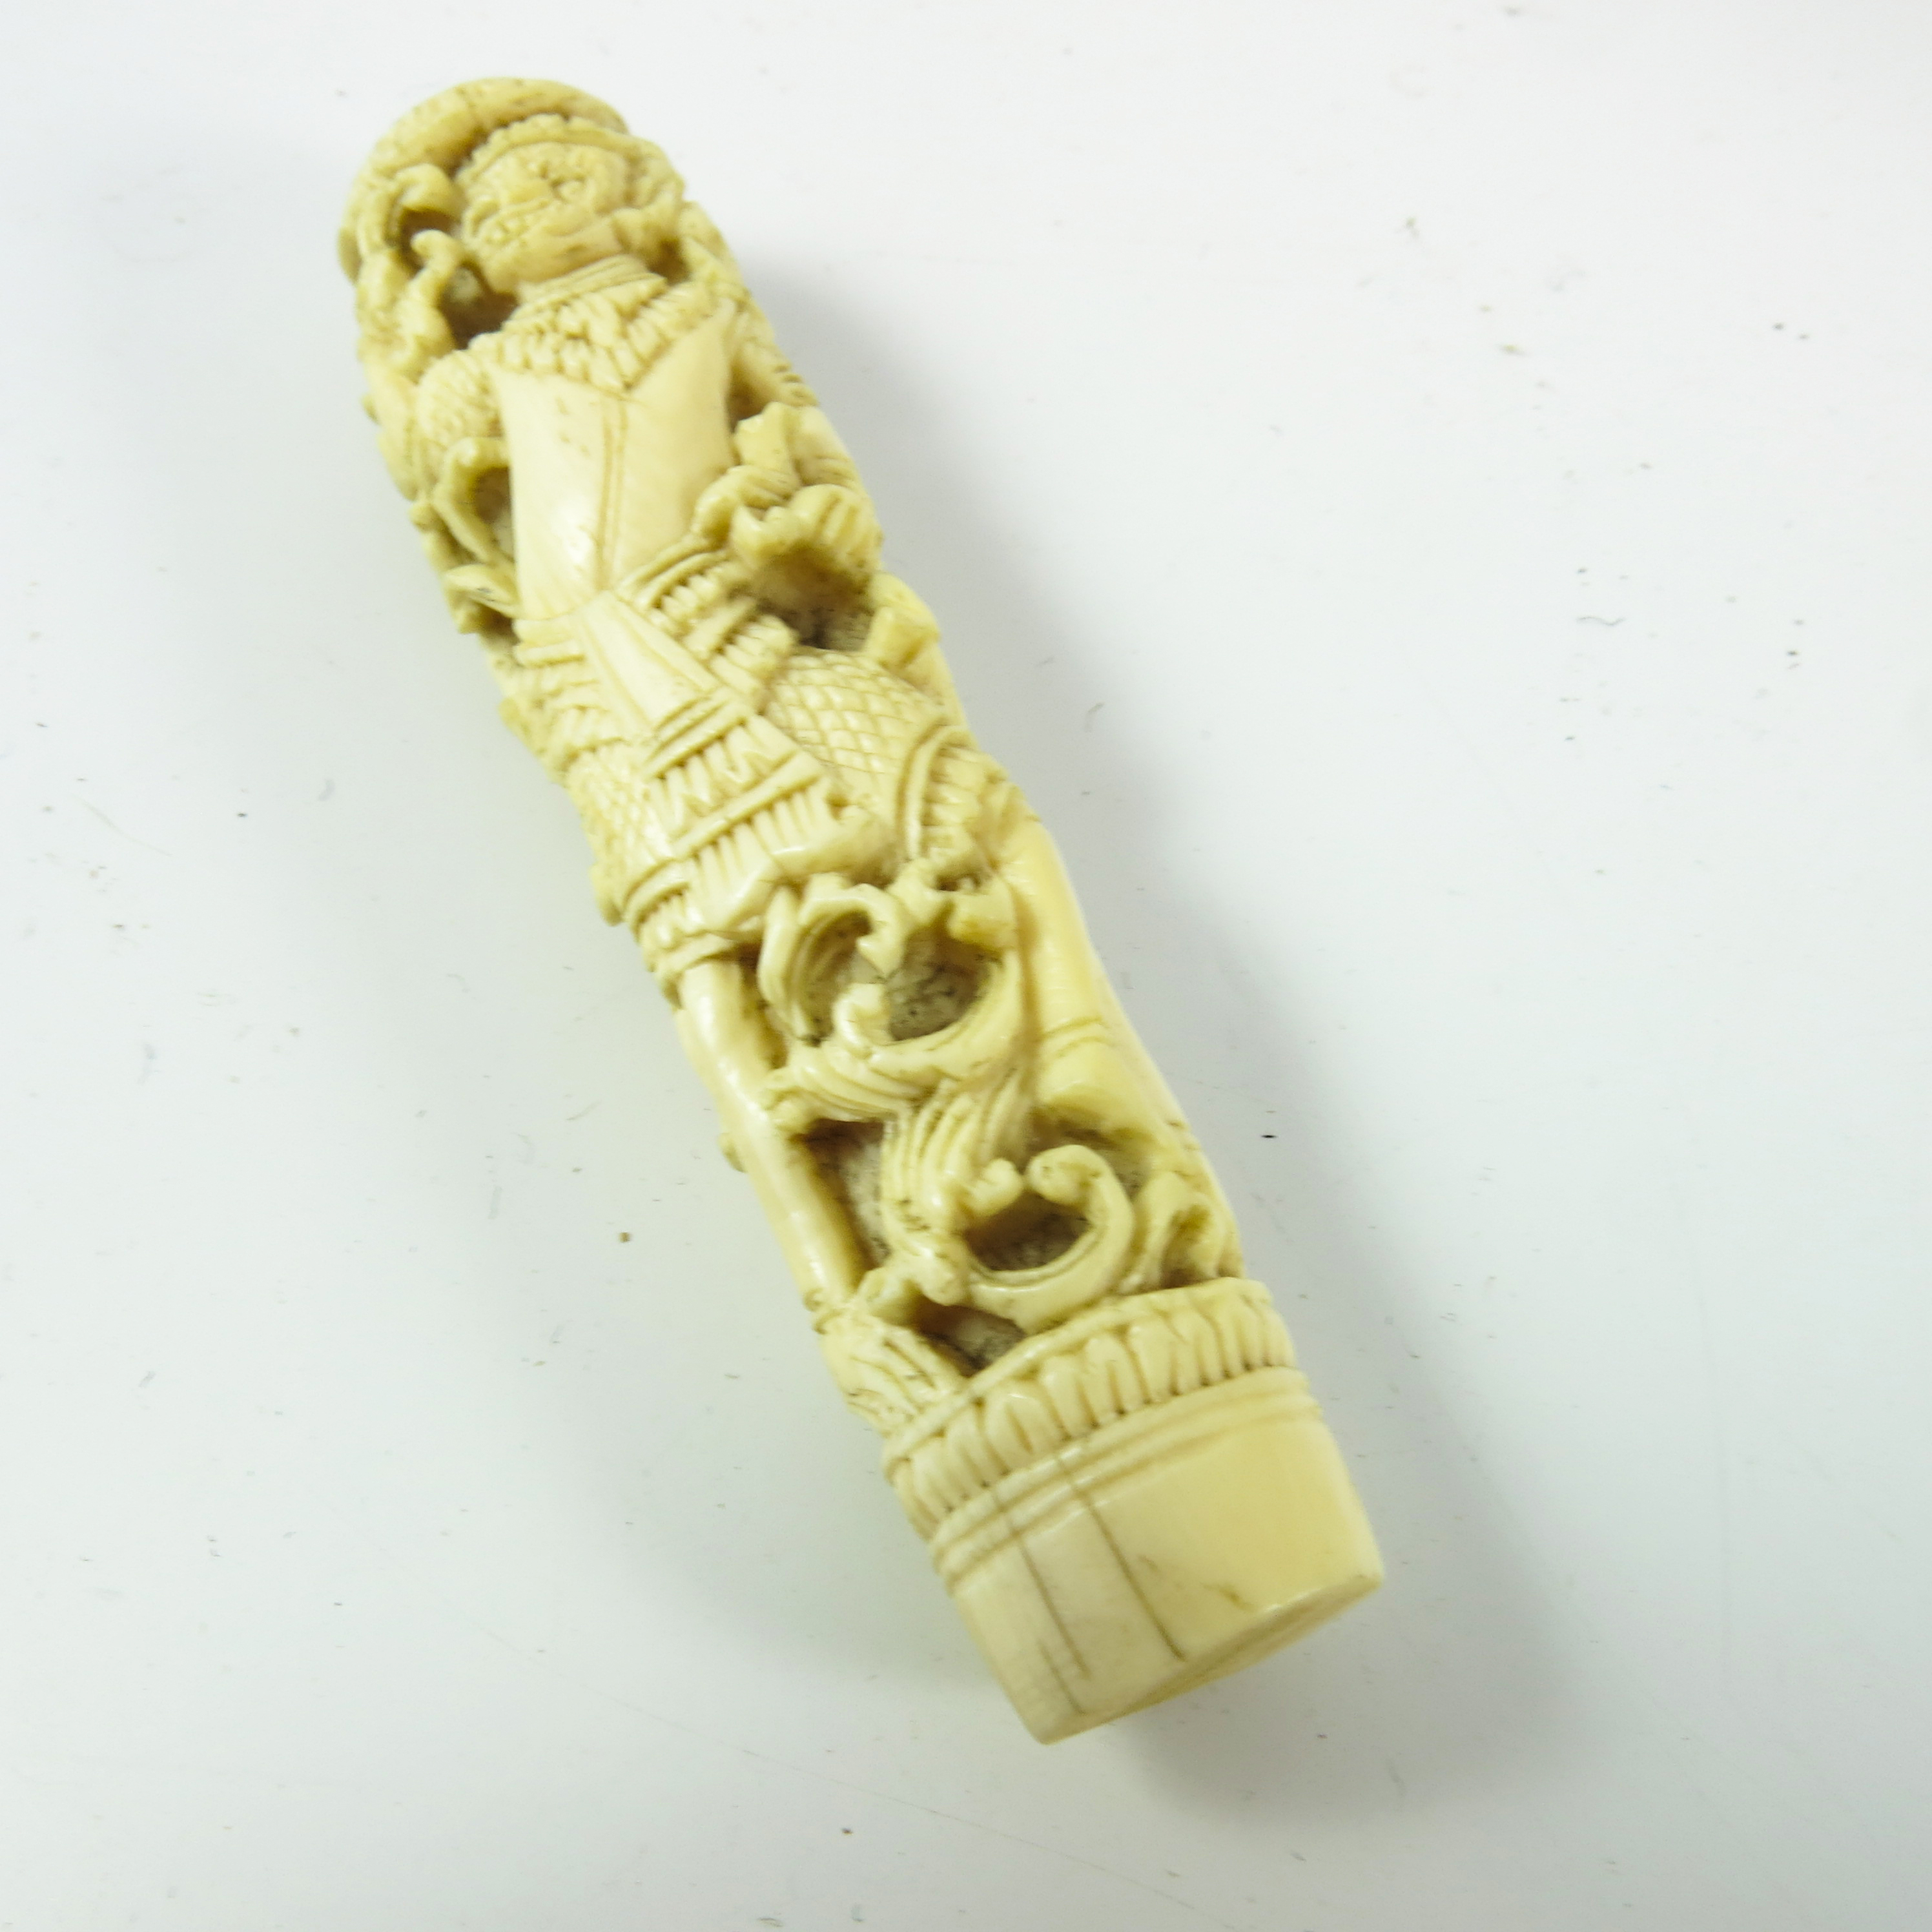 INTRICATELY CARVED 19TH CENTURY IVORY SEAL HANDLE/ TAMPER AND A SPOON - Image 2 of 3